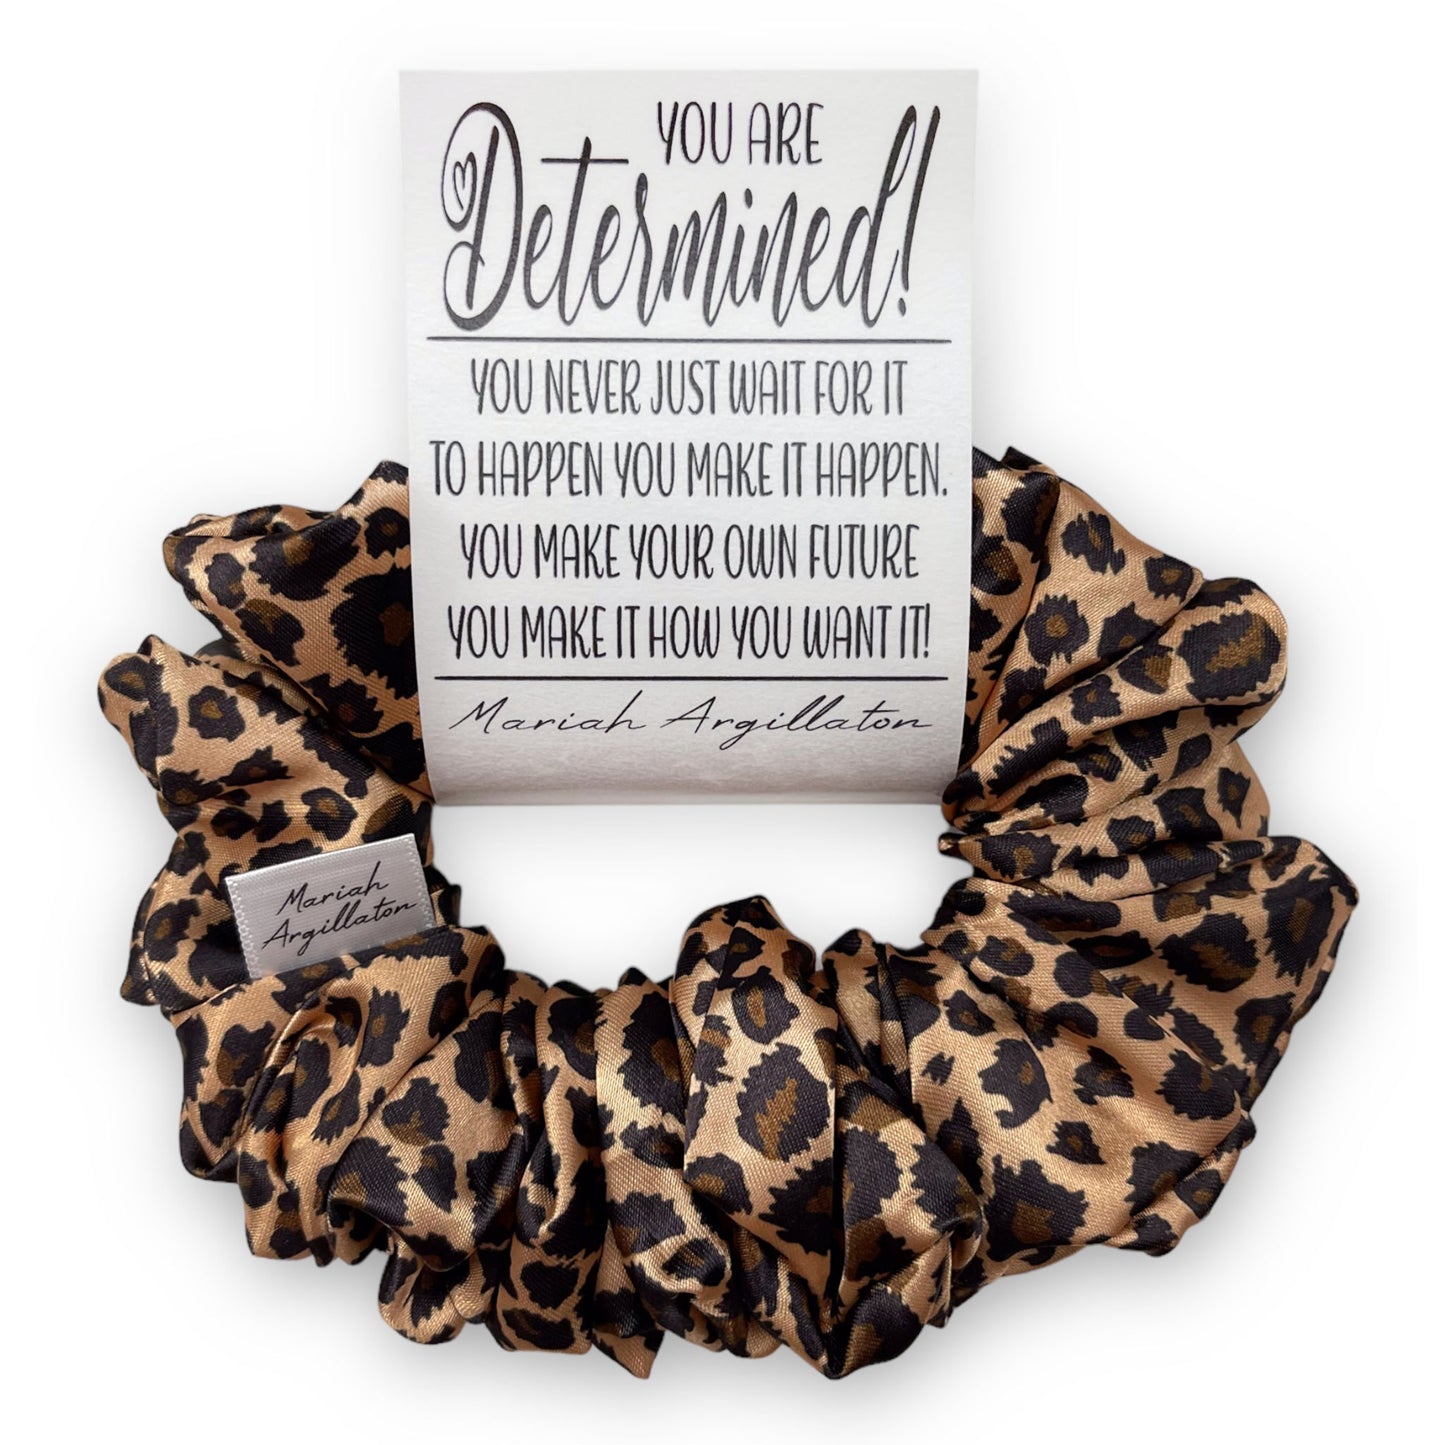 You Are Determined! Regular Scrunchie!